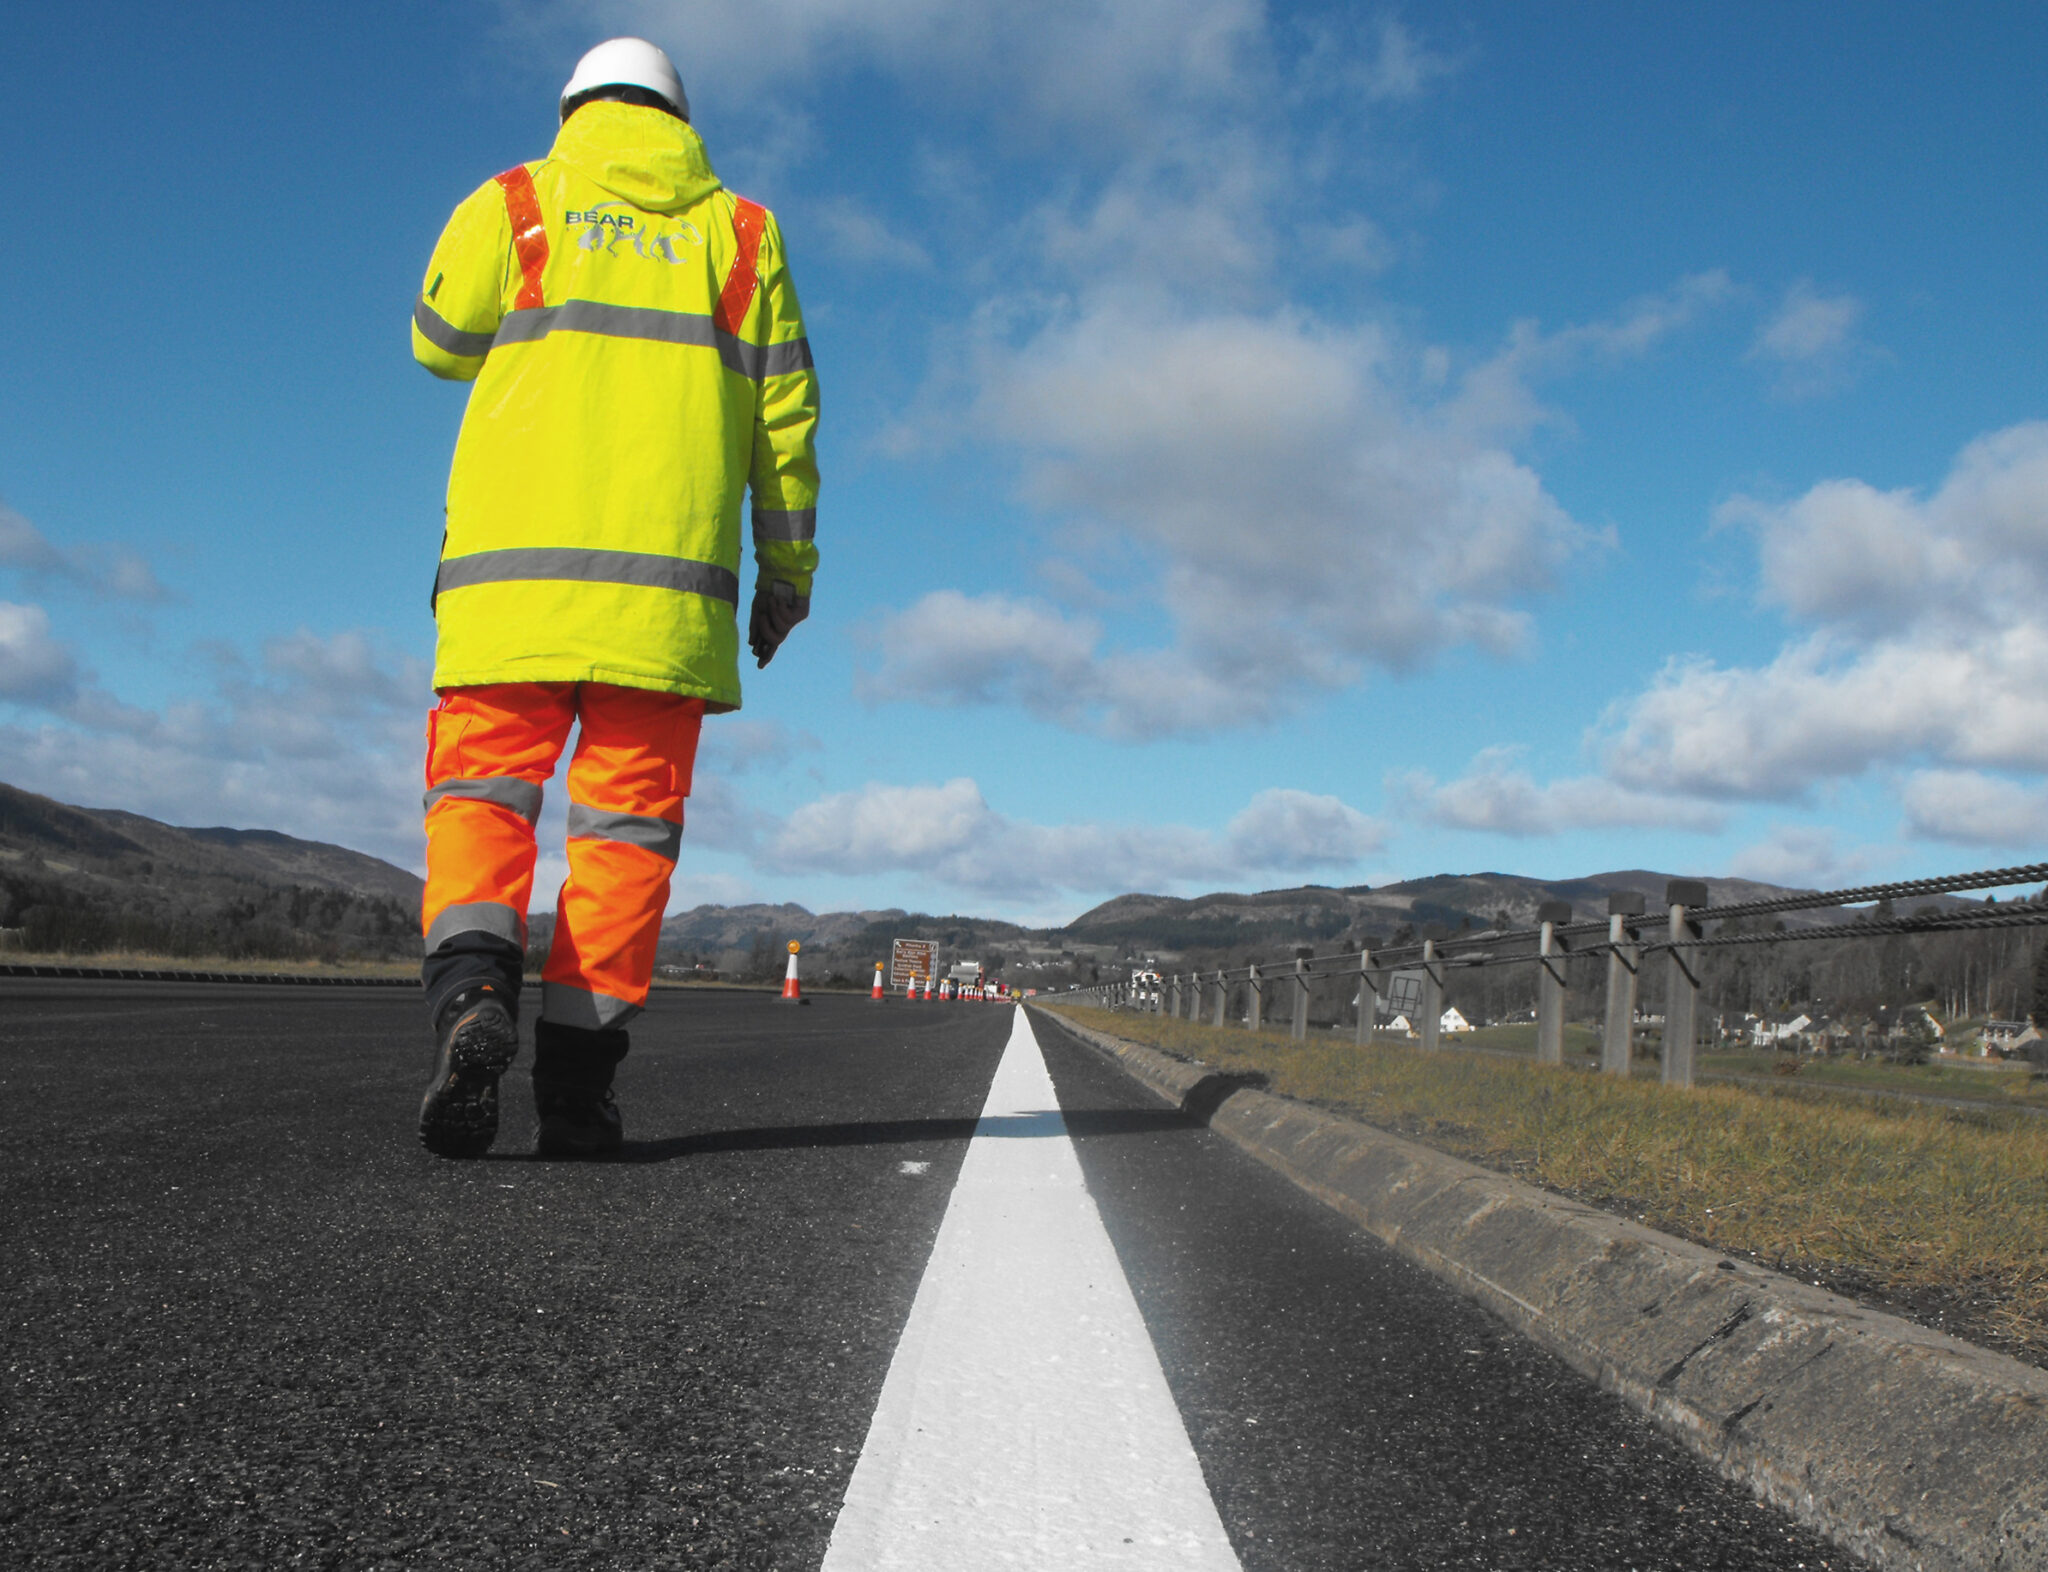 KERB AND SURFACING IMPROVEMENTS FOR THE A9 NEAR GOLSPIE